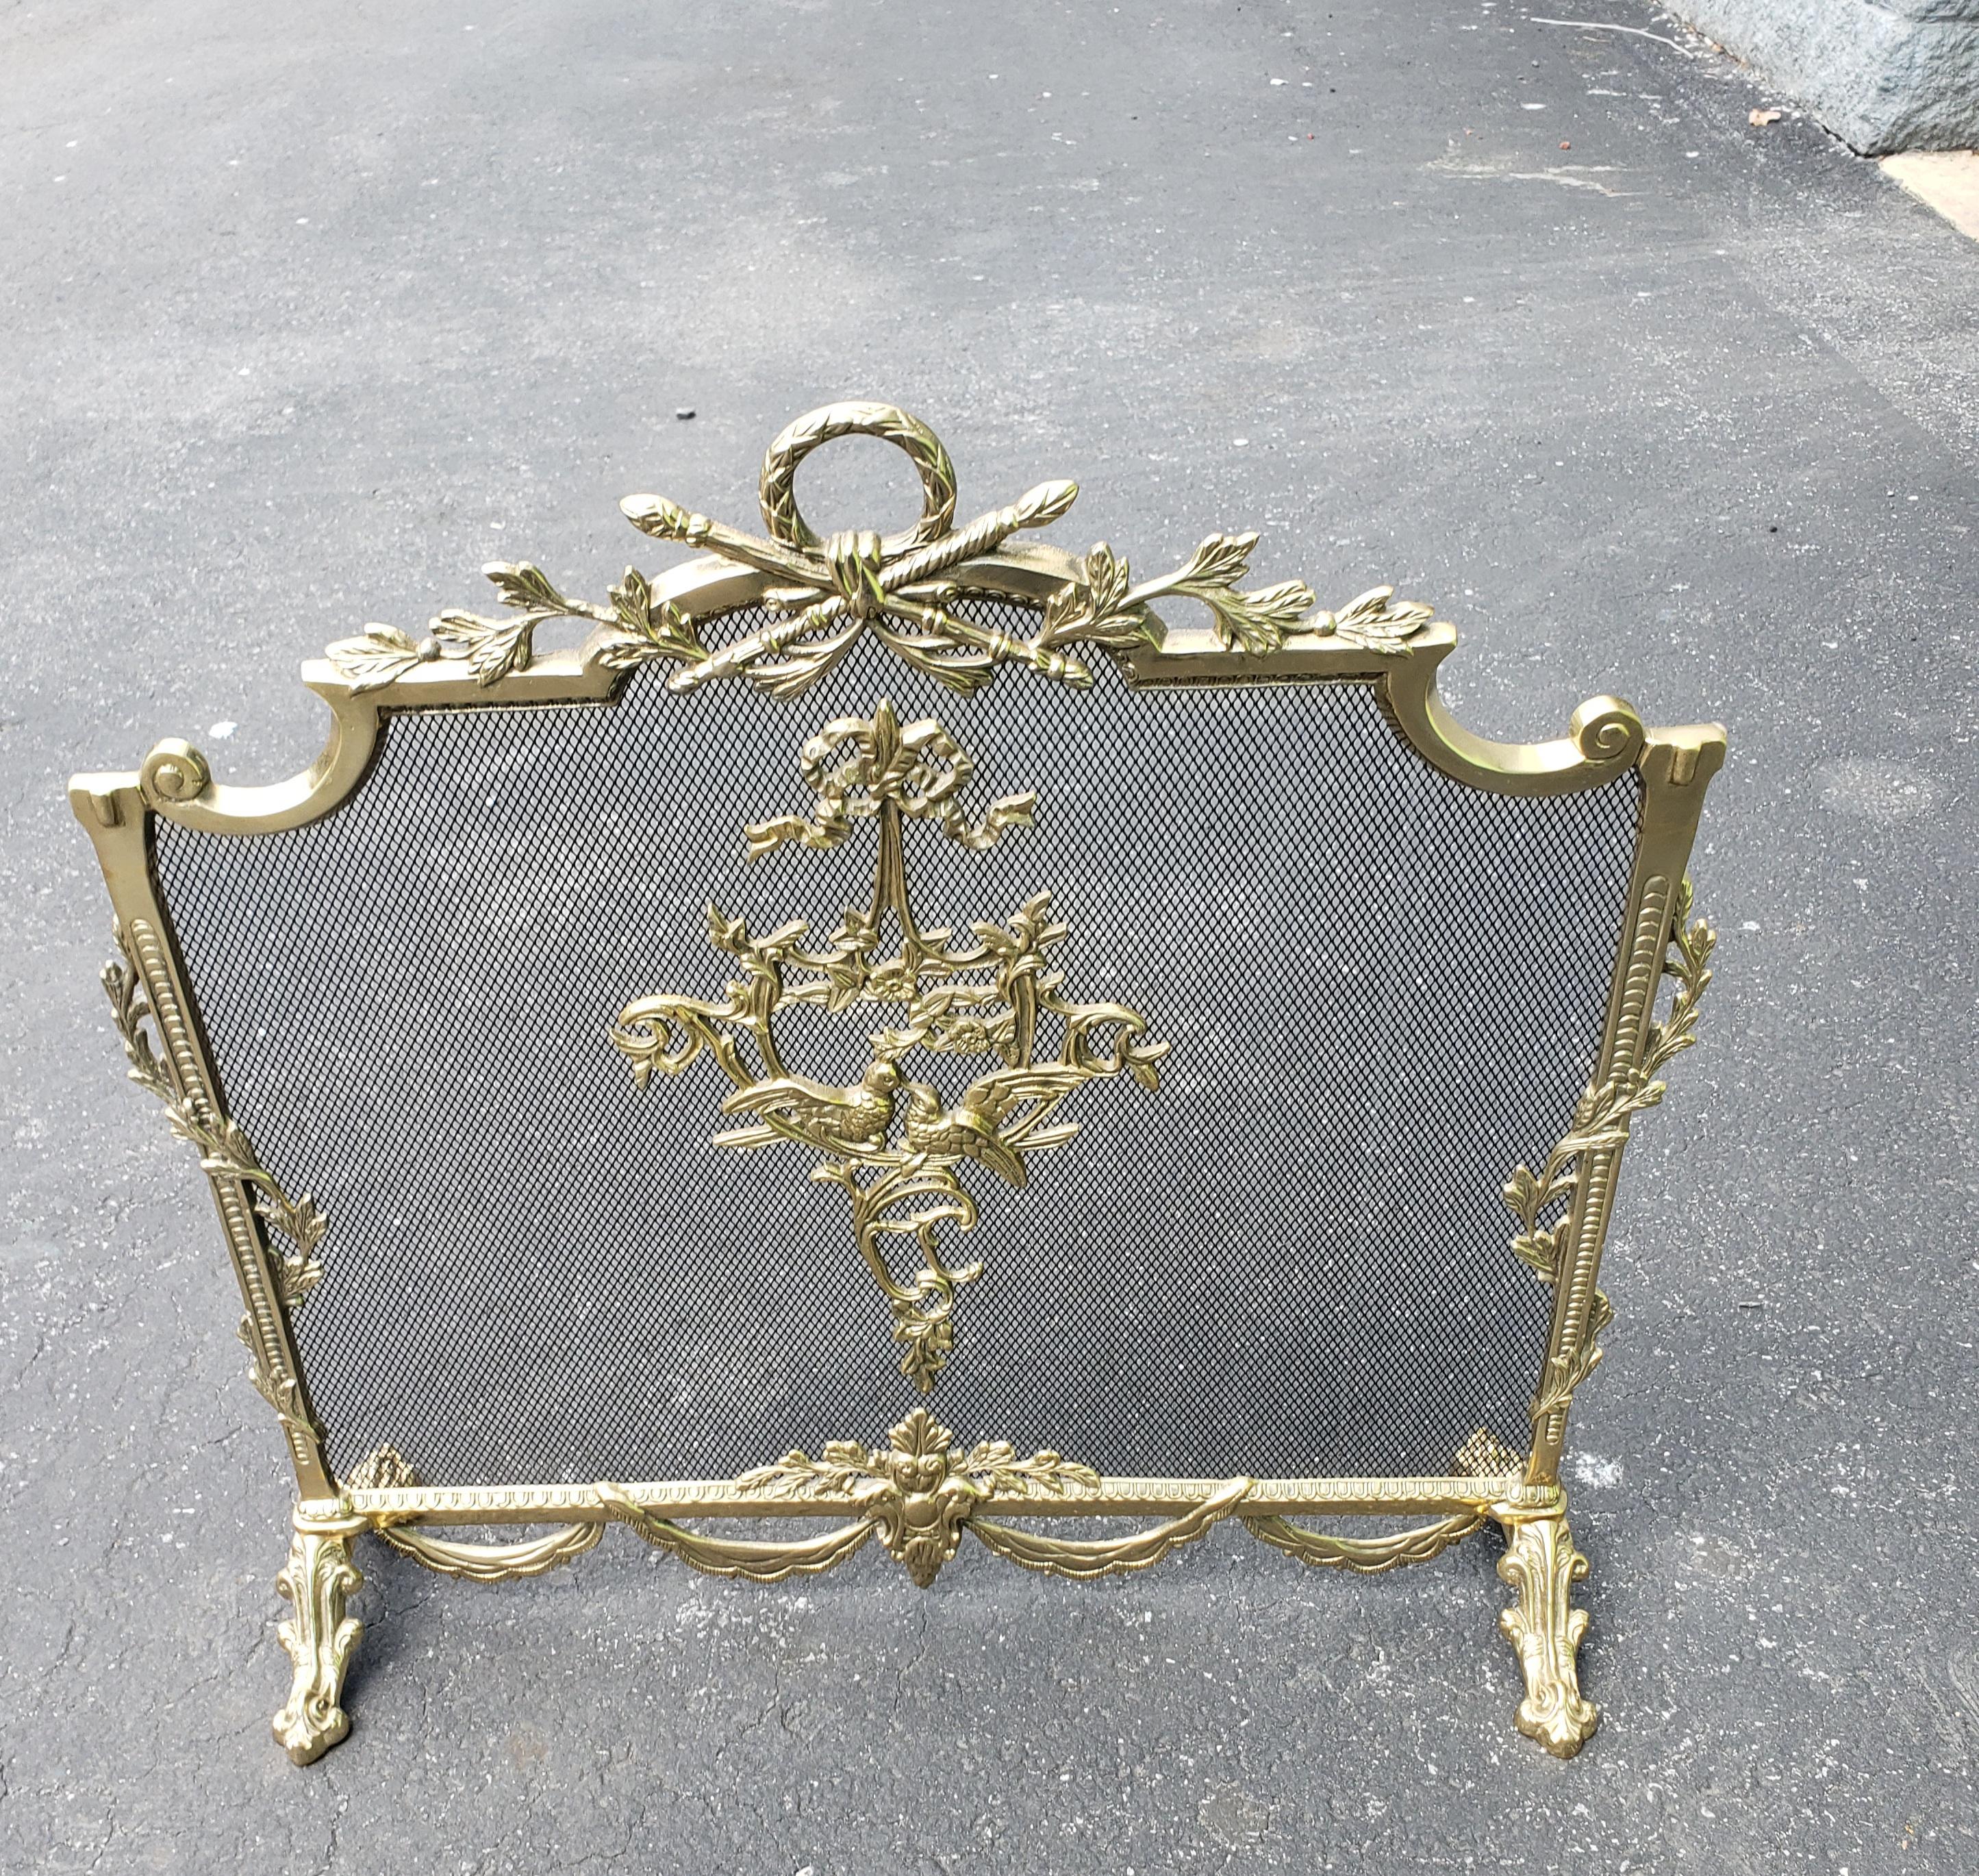 Exceptionally beautiful French Louis XVI Empire Style Ornate Brass Fireplace Screen in great vintage condition.